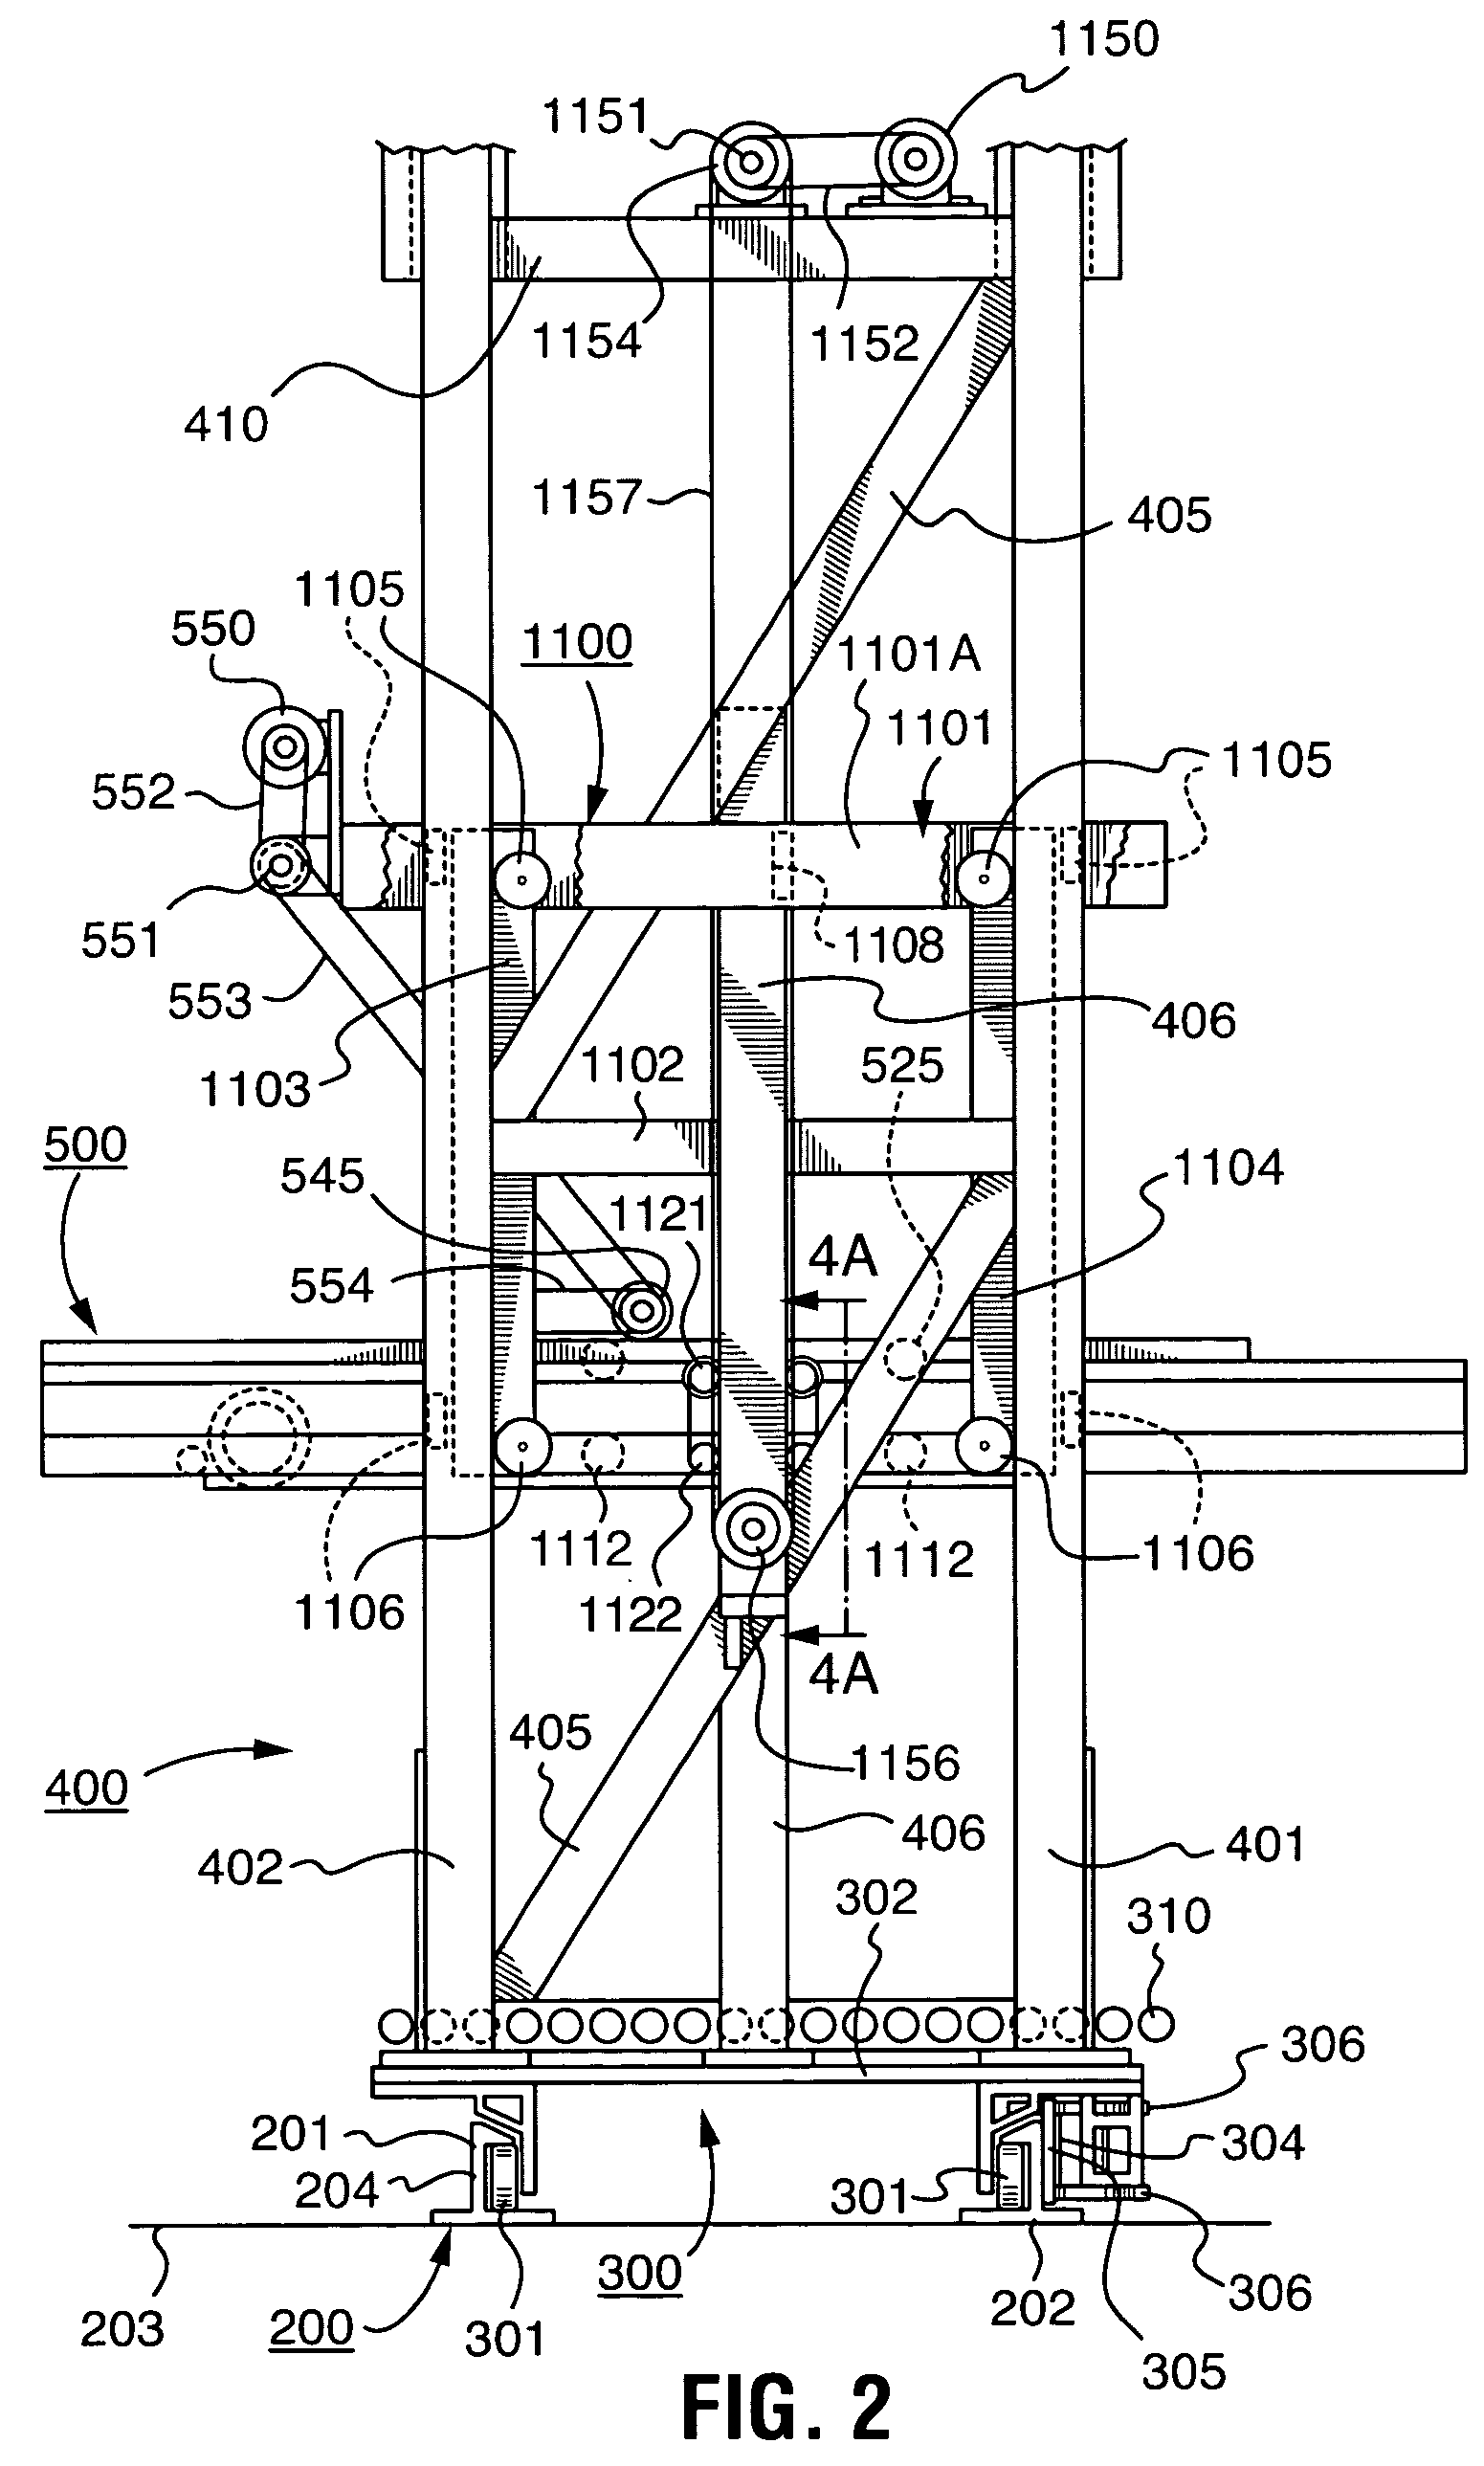 Article retrieving and positioning system and apparatus for articles, layers, cases, and pallets